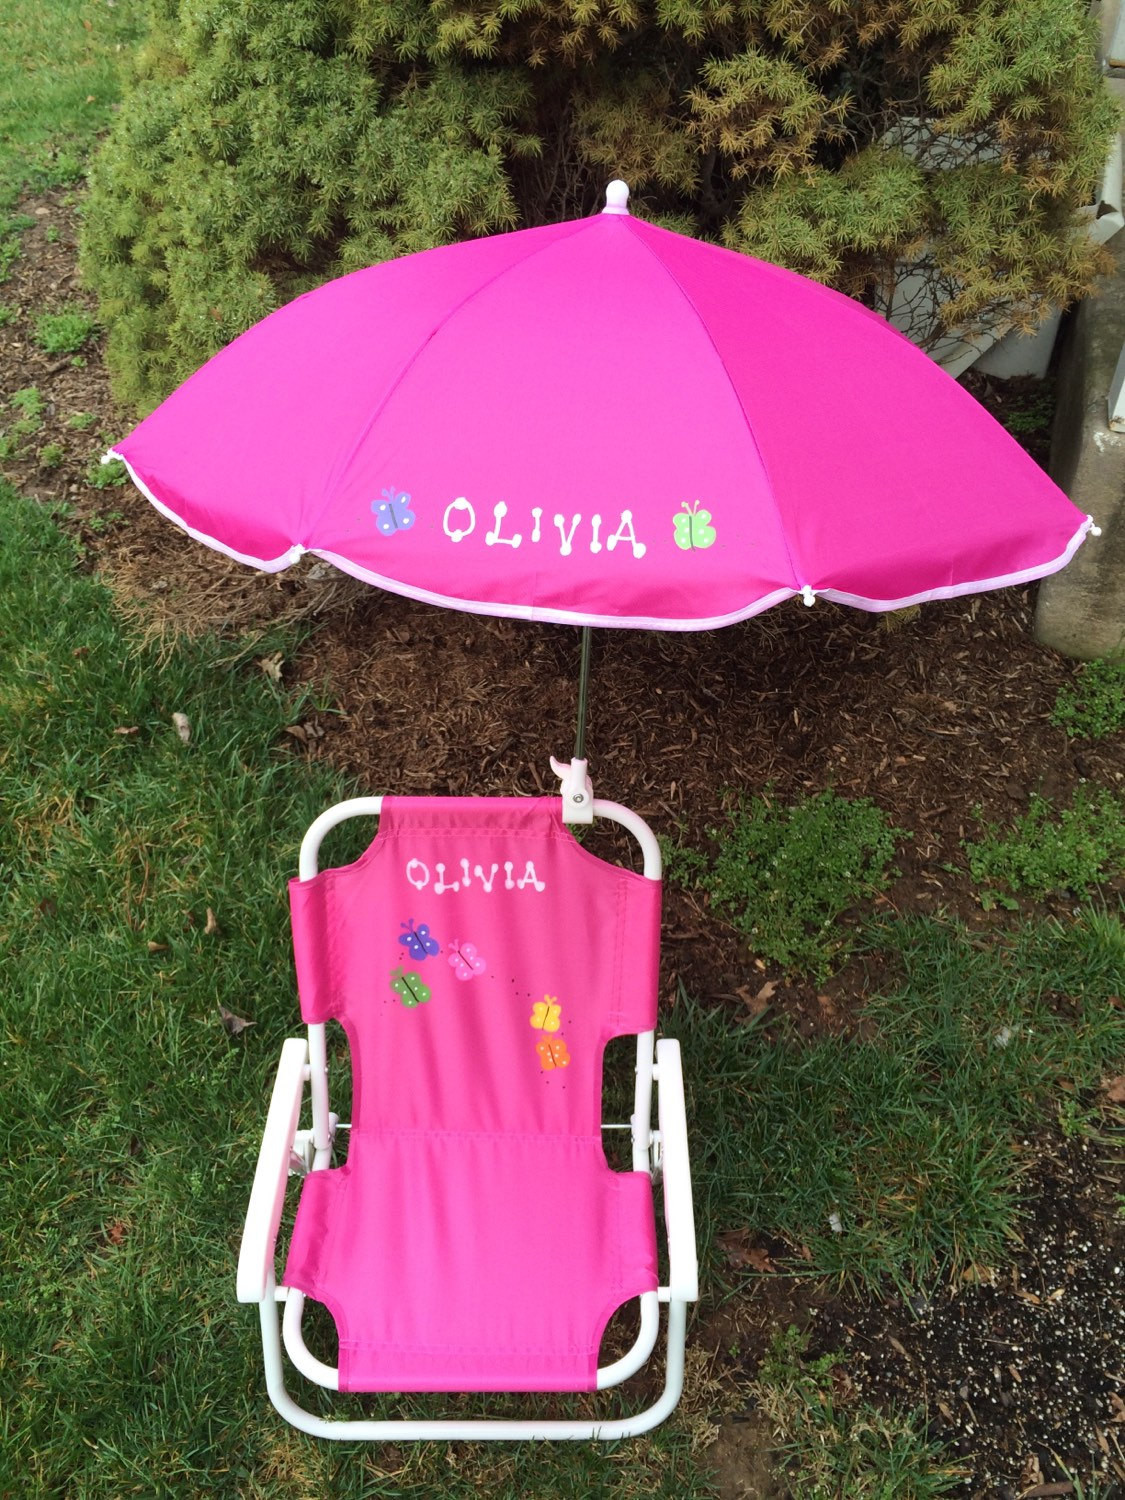 Kids Beach Chair With Umbrella
 Personalized beach chair & umbrella for kids